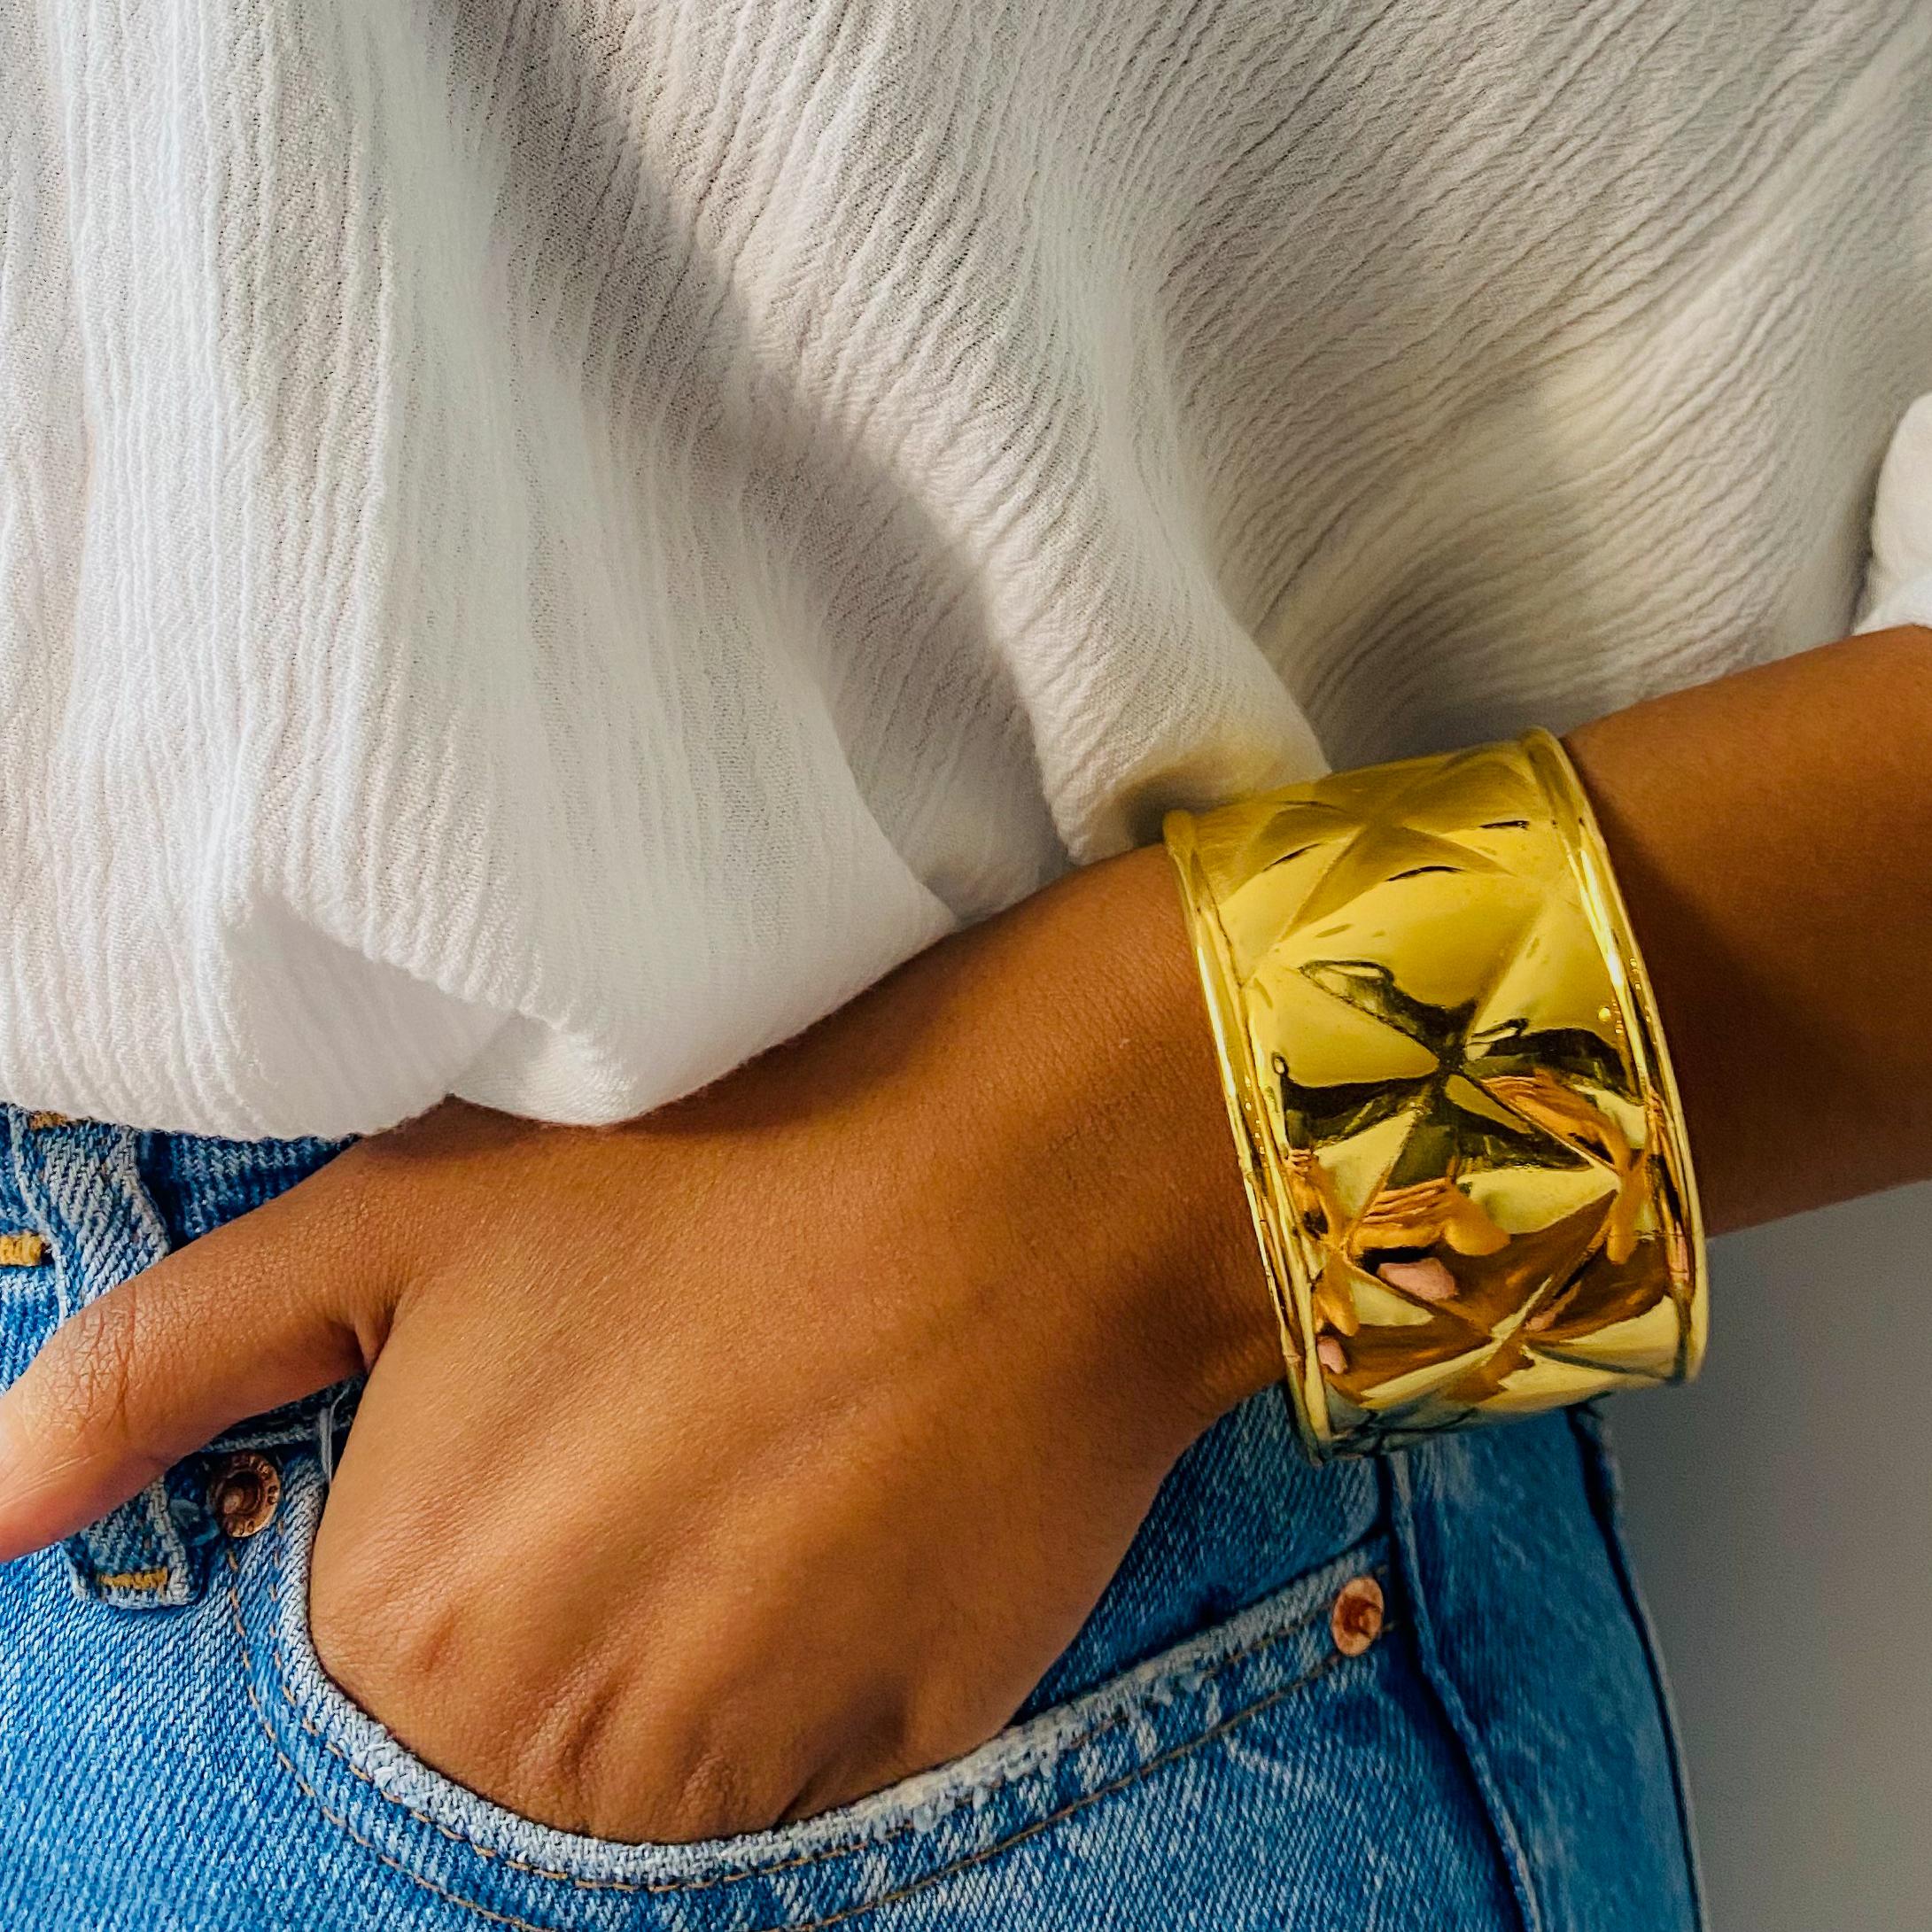 Chanel Vintage 1980s Cuff Bracelet

Timelessly classic quilted cuff from the early 80s Chanel archive

Detail
-Made in France in the early 80s
-Crafted from 24k gold plated metal
-Iconic matelasse pattern
-Features tiny Chanel cc logo 

 Size &